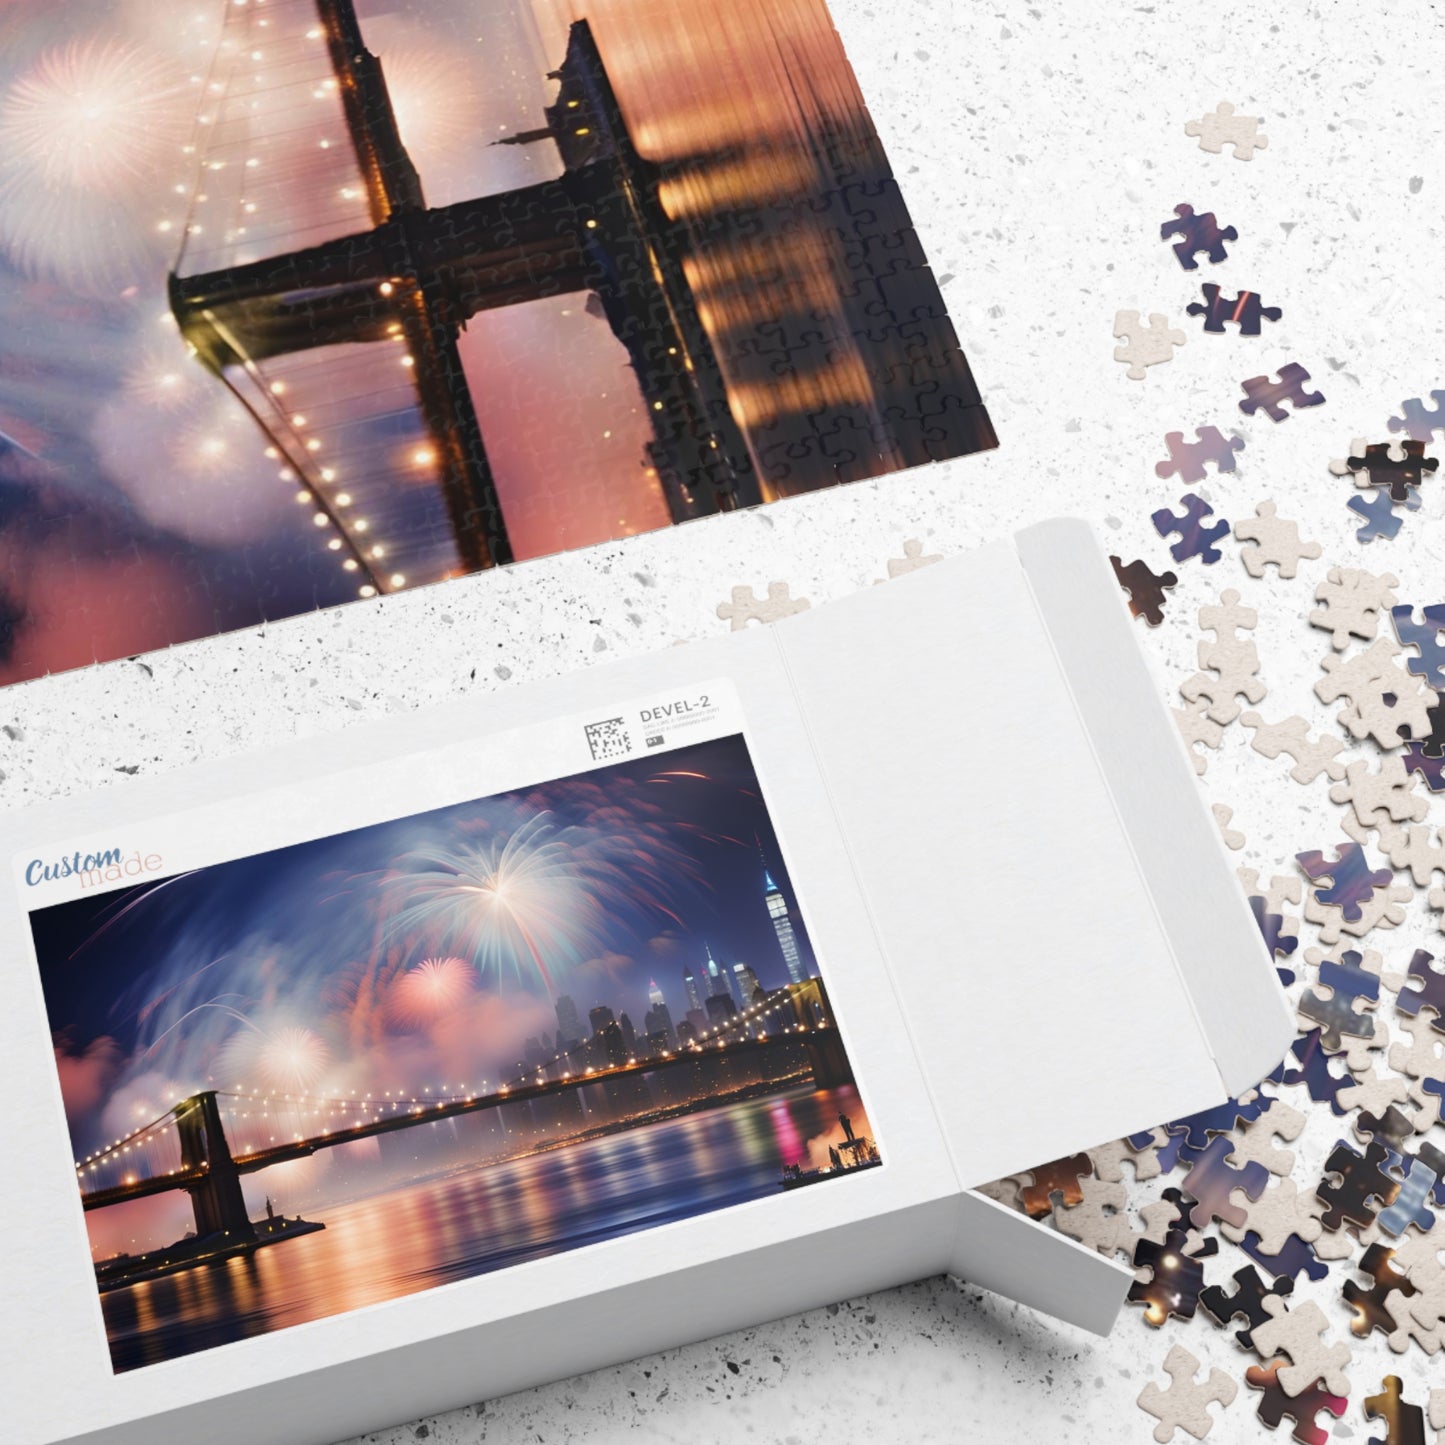 New Year's Eve over Brooklyn Bridge Puzzle (110, 252, 520, 1014-piece)